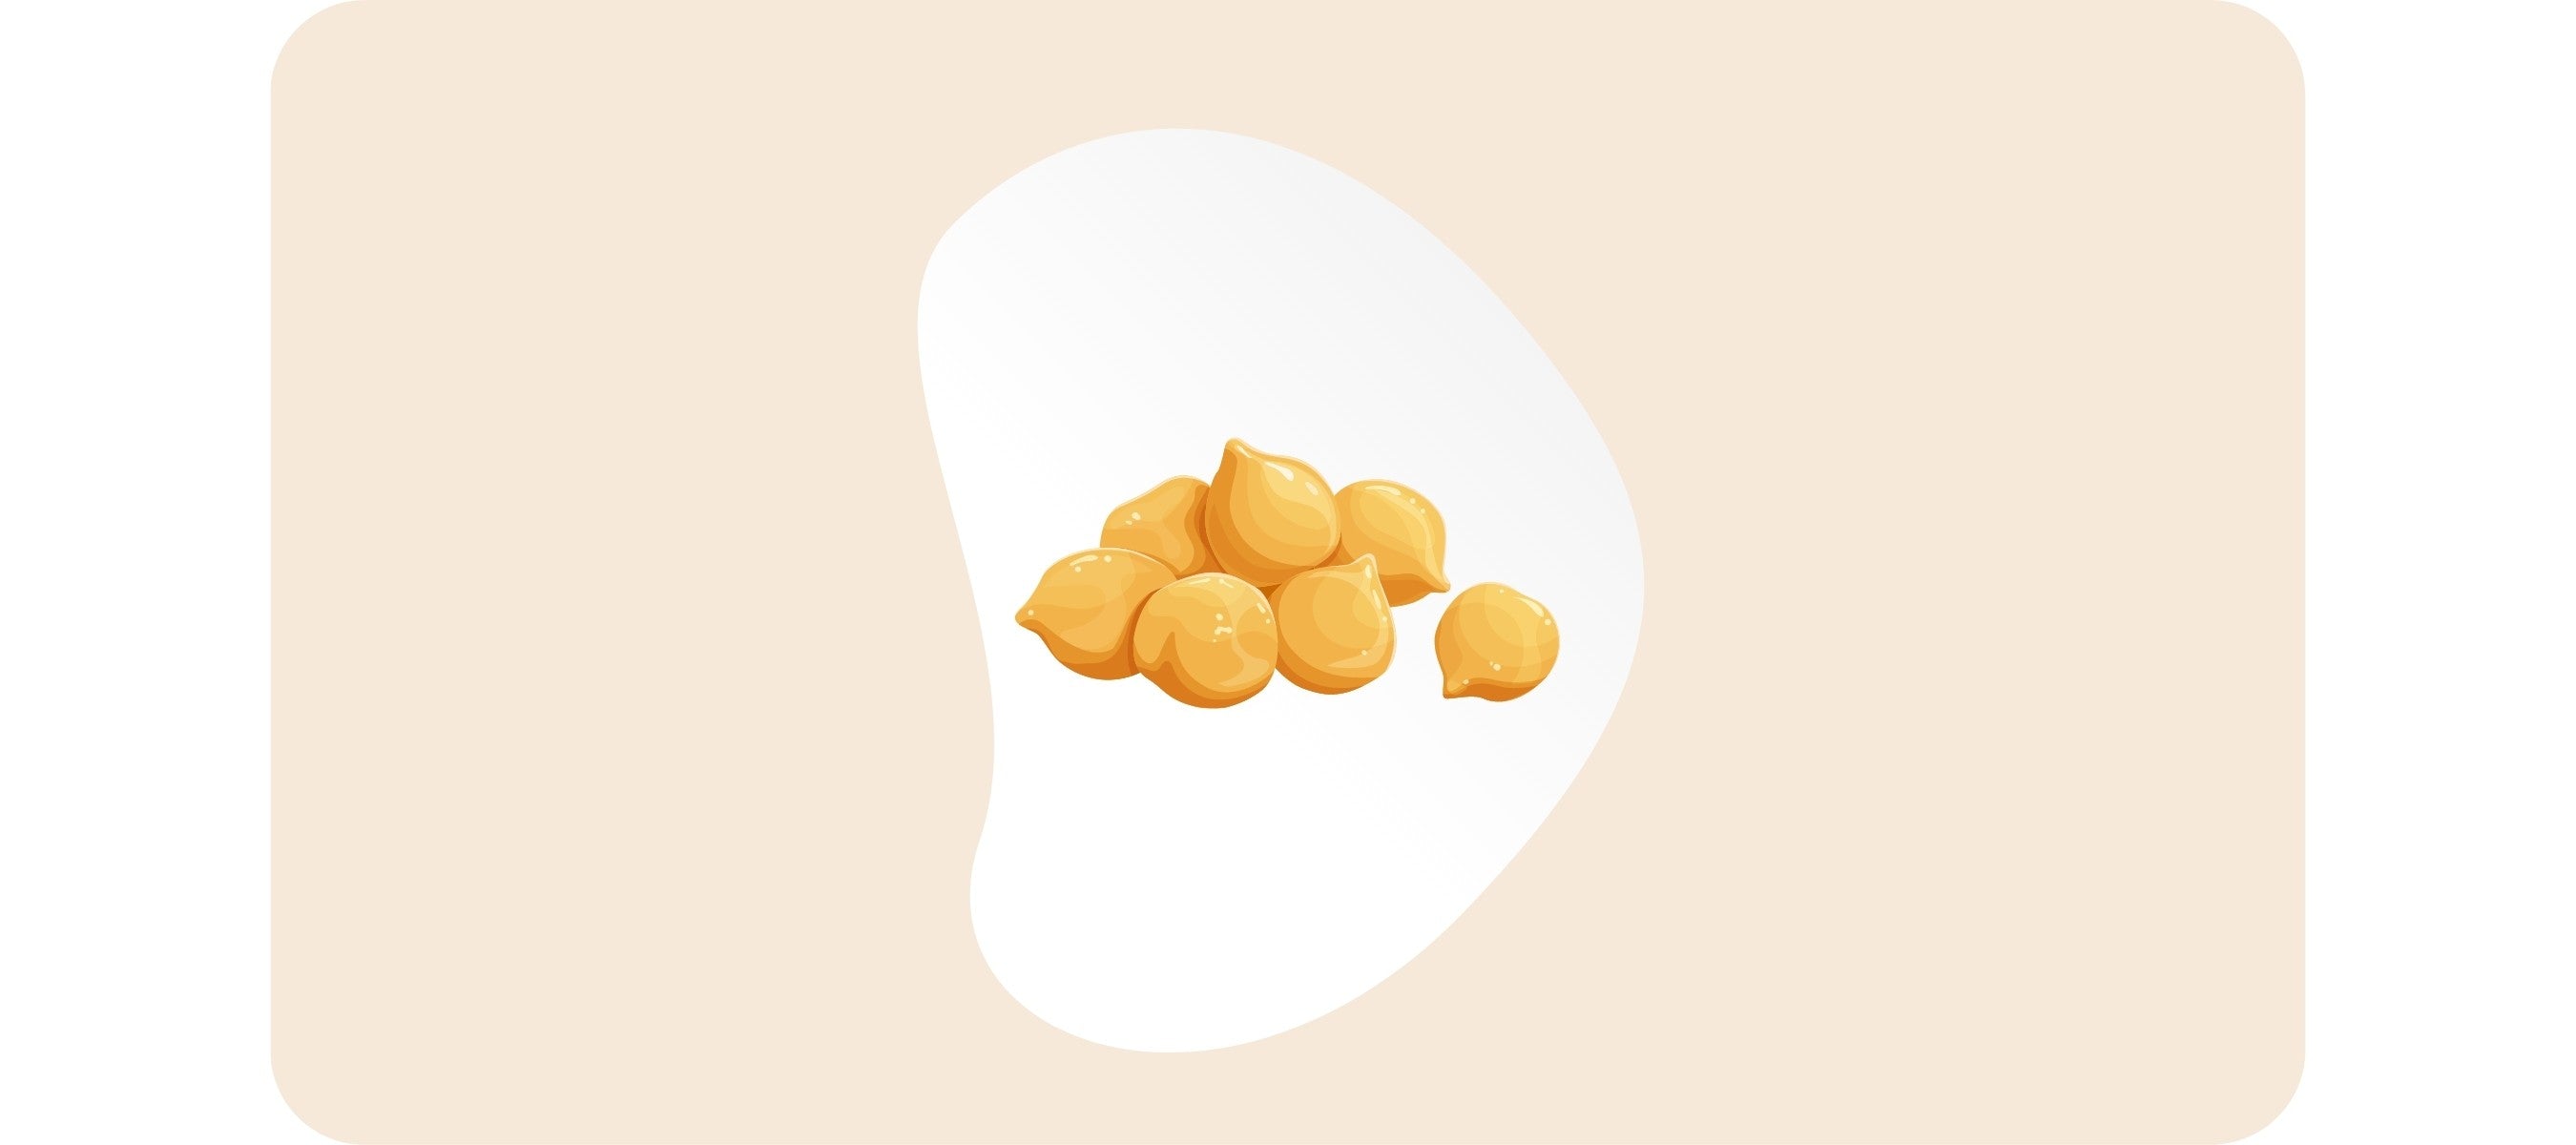 Chickpeas are full of L-Tryptophan.